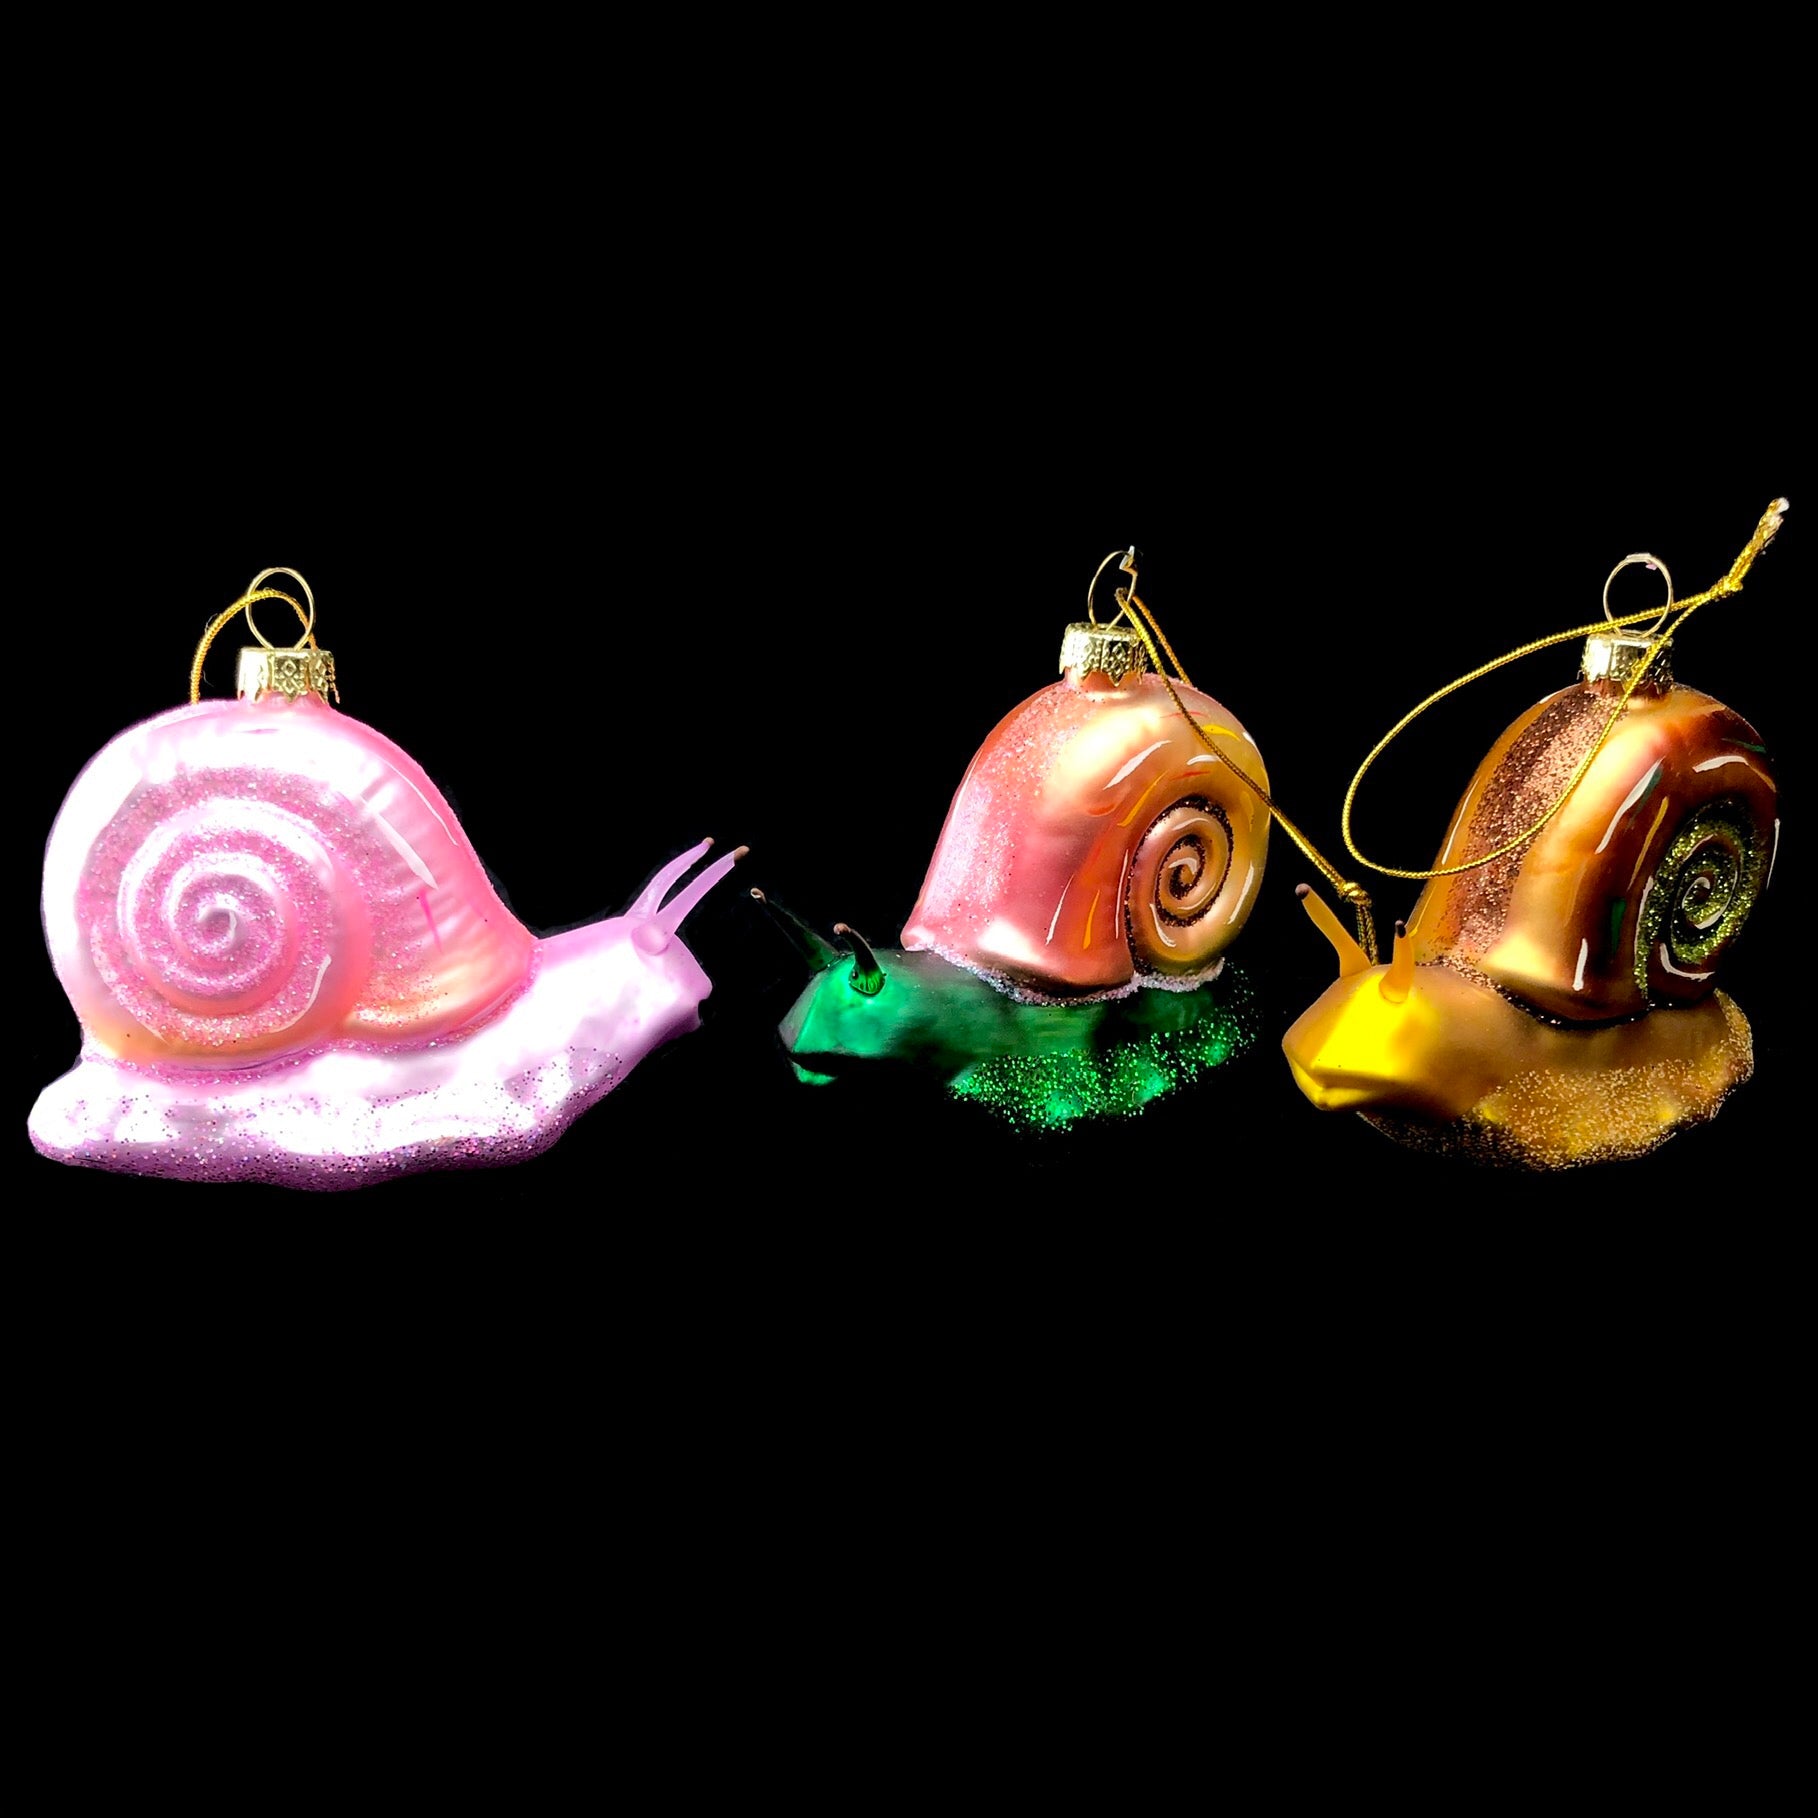 Three Snail Ornaments in pink, green and brown